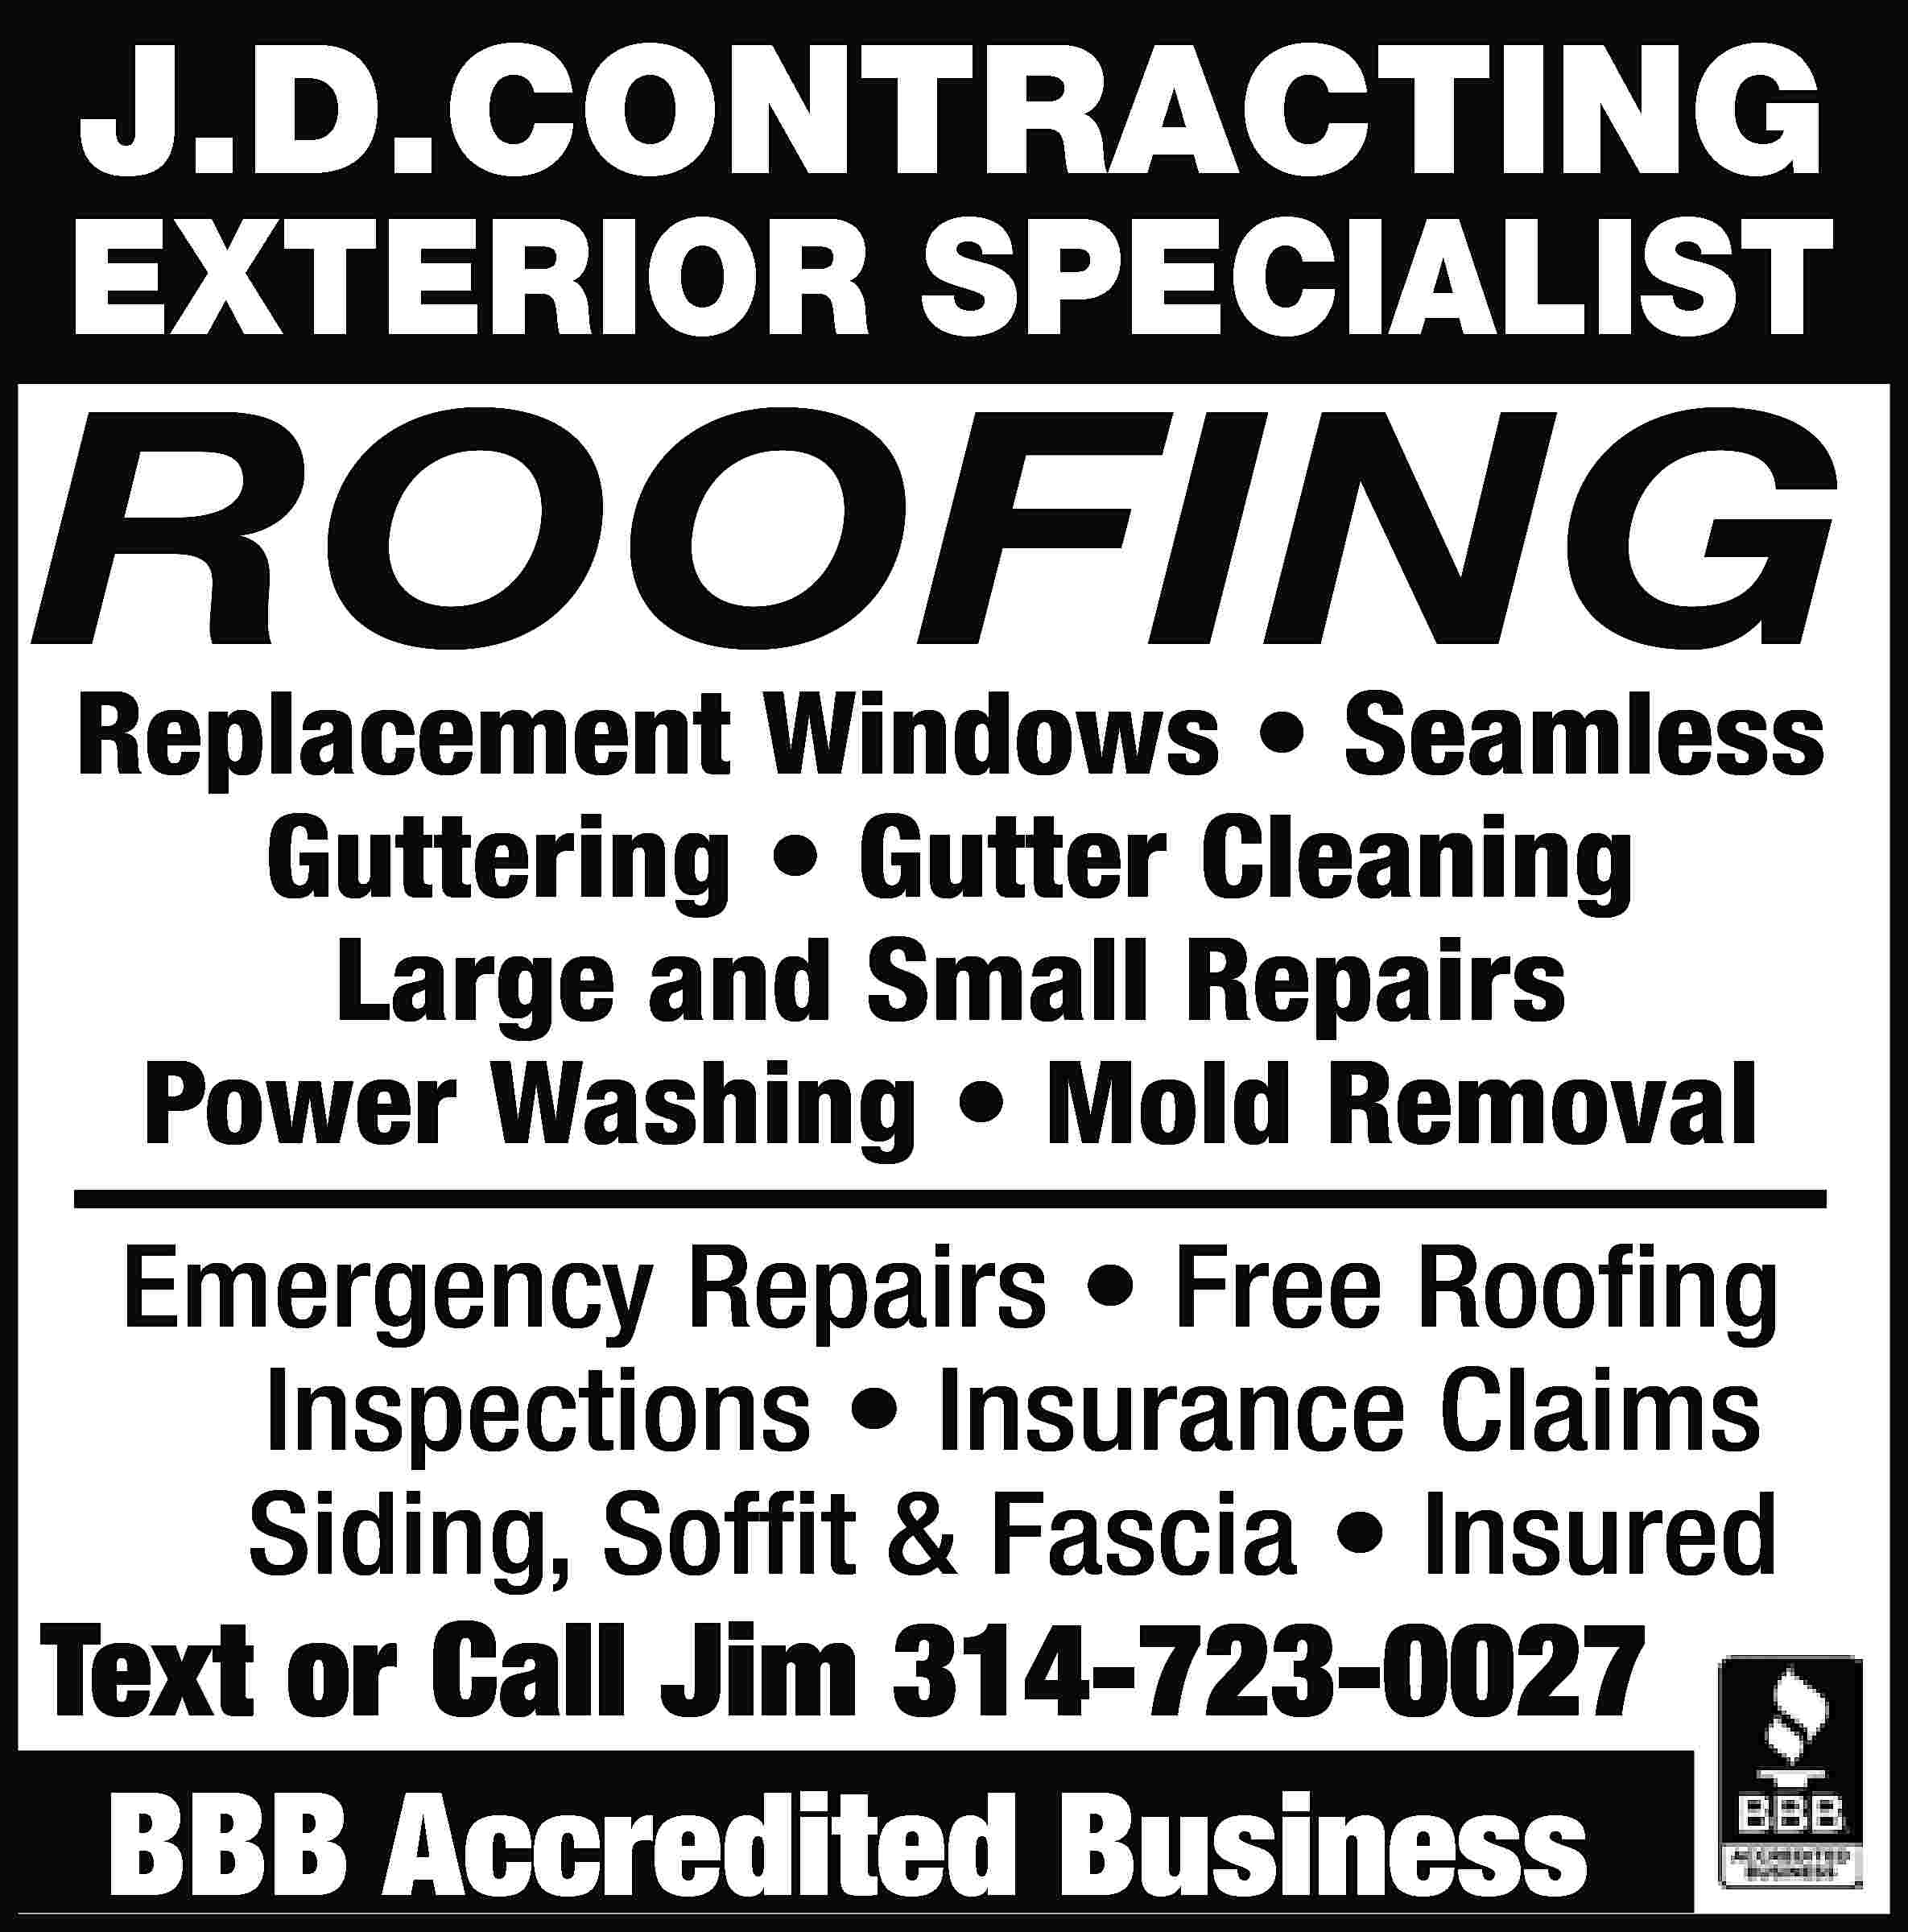 J.D.CONTRACTING EXTERIOR SPECIALIST ROOFING Replacement  J.D.CONTRACTING EXTERIOR SPECIALIST ROOFING Replacement Windows • Seamless Guttering • Gutter Cleaning Large and Small Repairs Power Washing • Mold Removal Emergency Repairs • Free Roofing Inspections • Insurance Claims Siding, Soffit & Fascia • Insured Text or Call Jim 314-723-0027 BBB Accredited Business